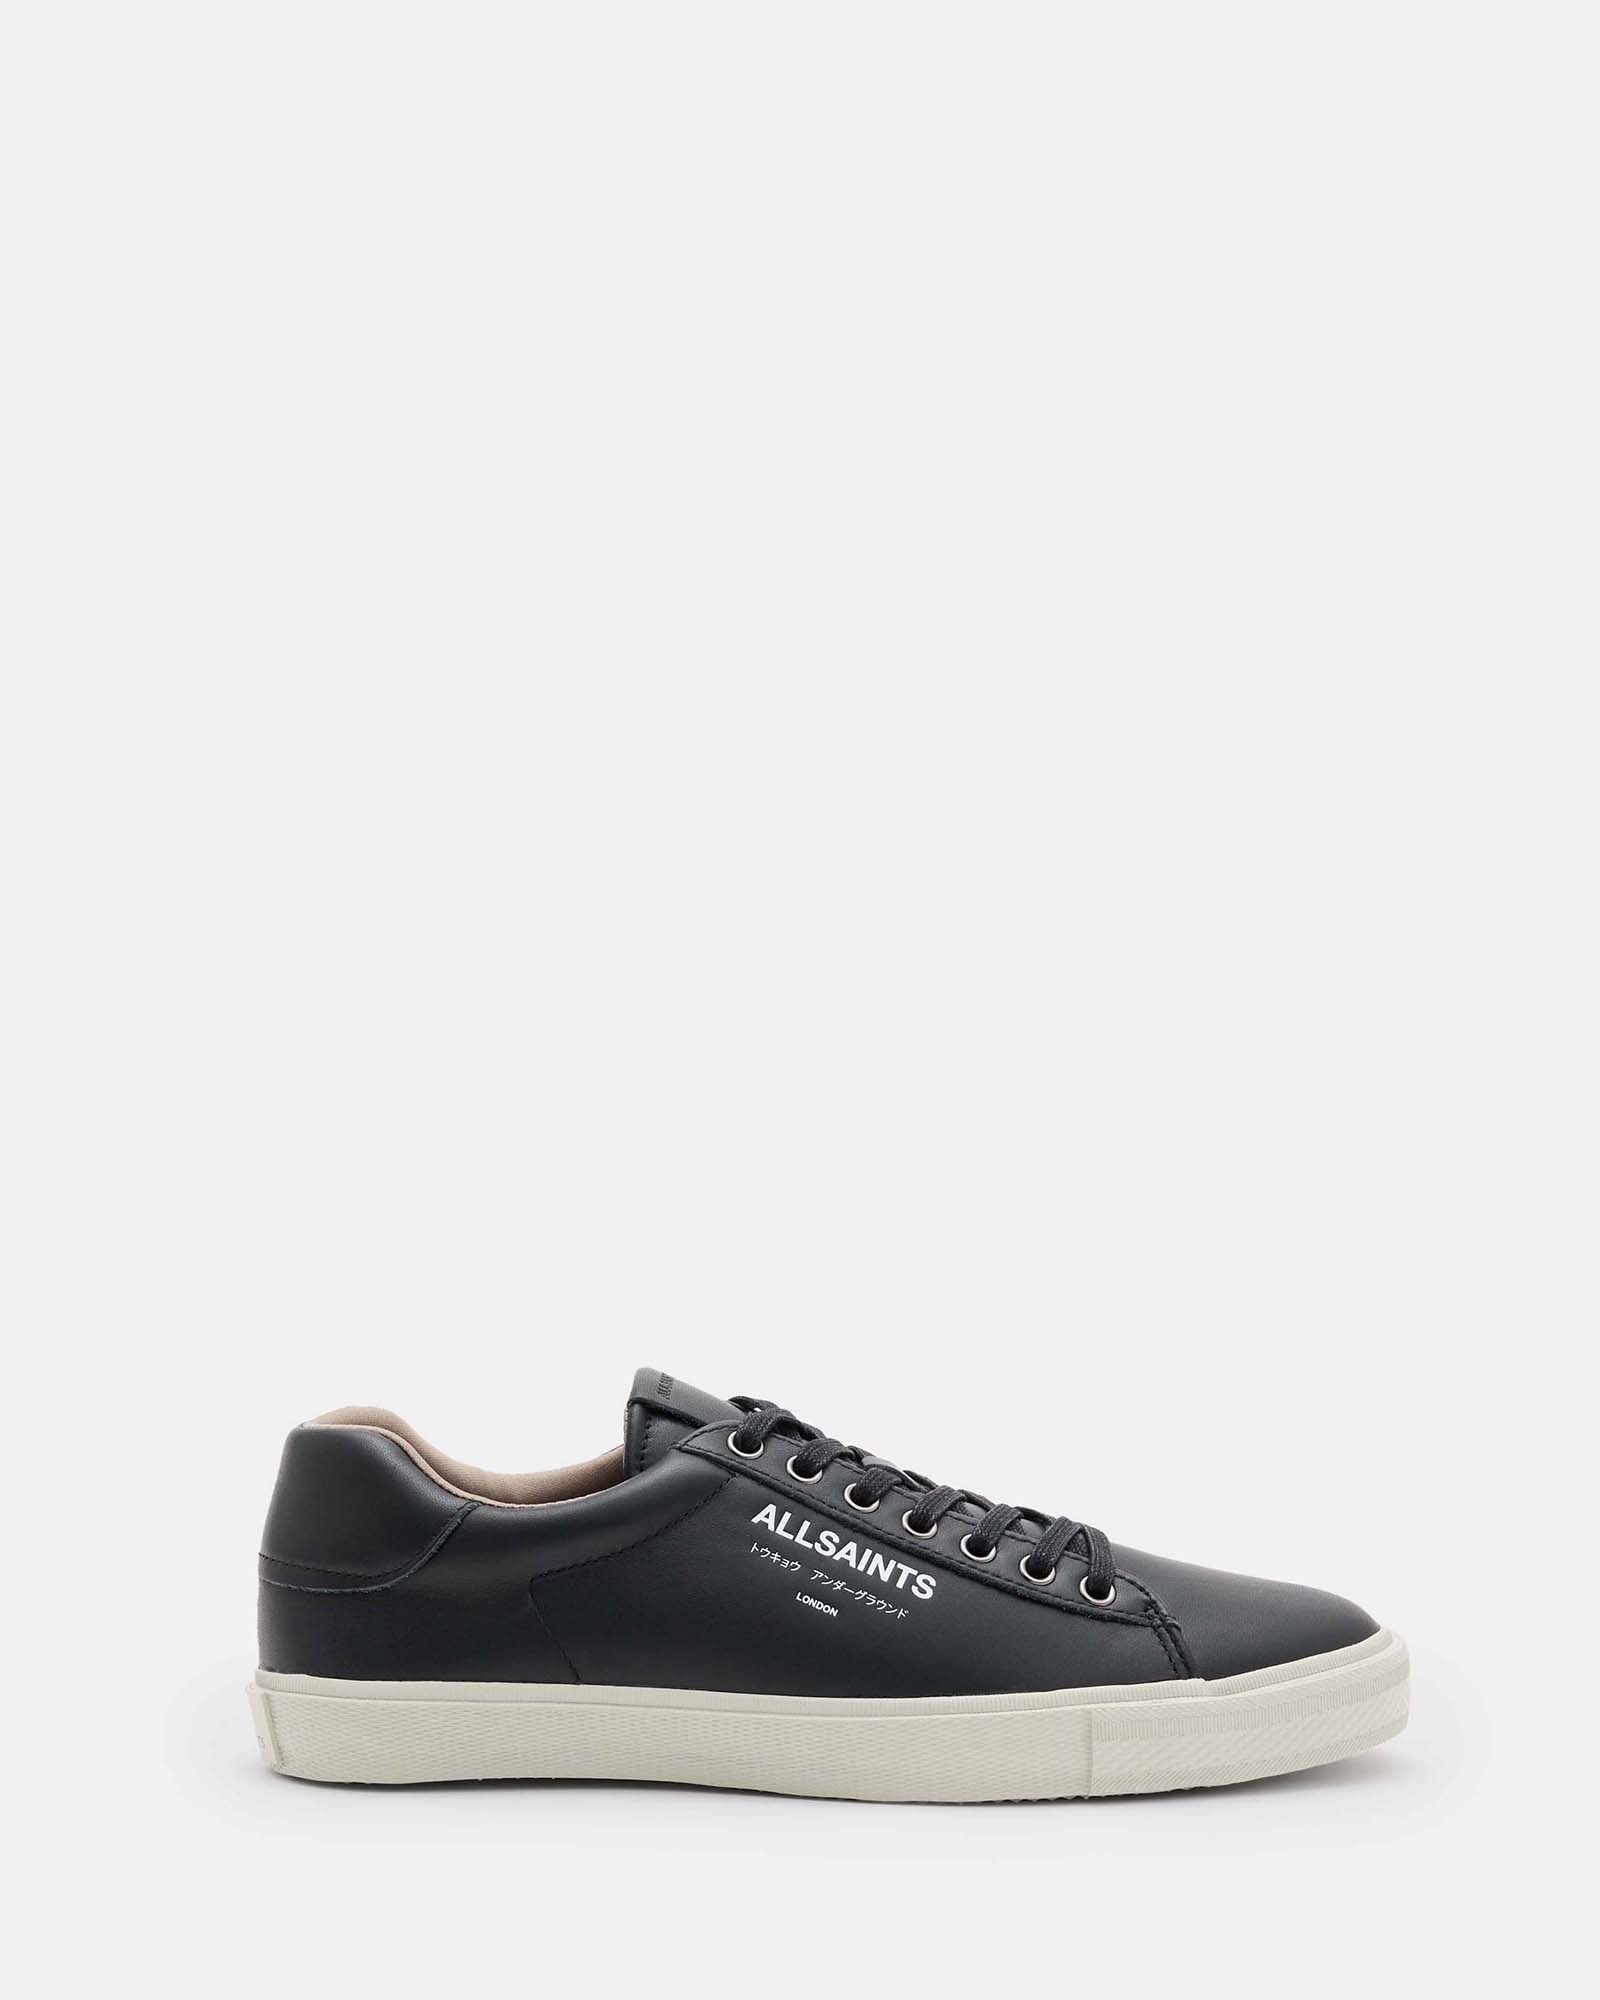 AllSaints Underground Leather Low Top Trainers,, Black